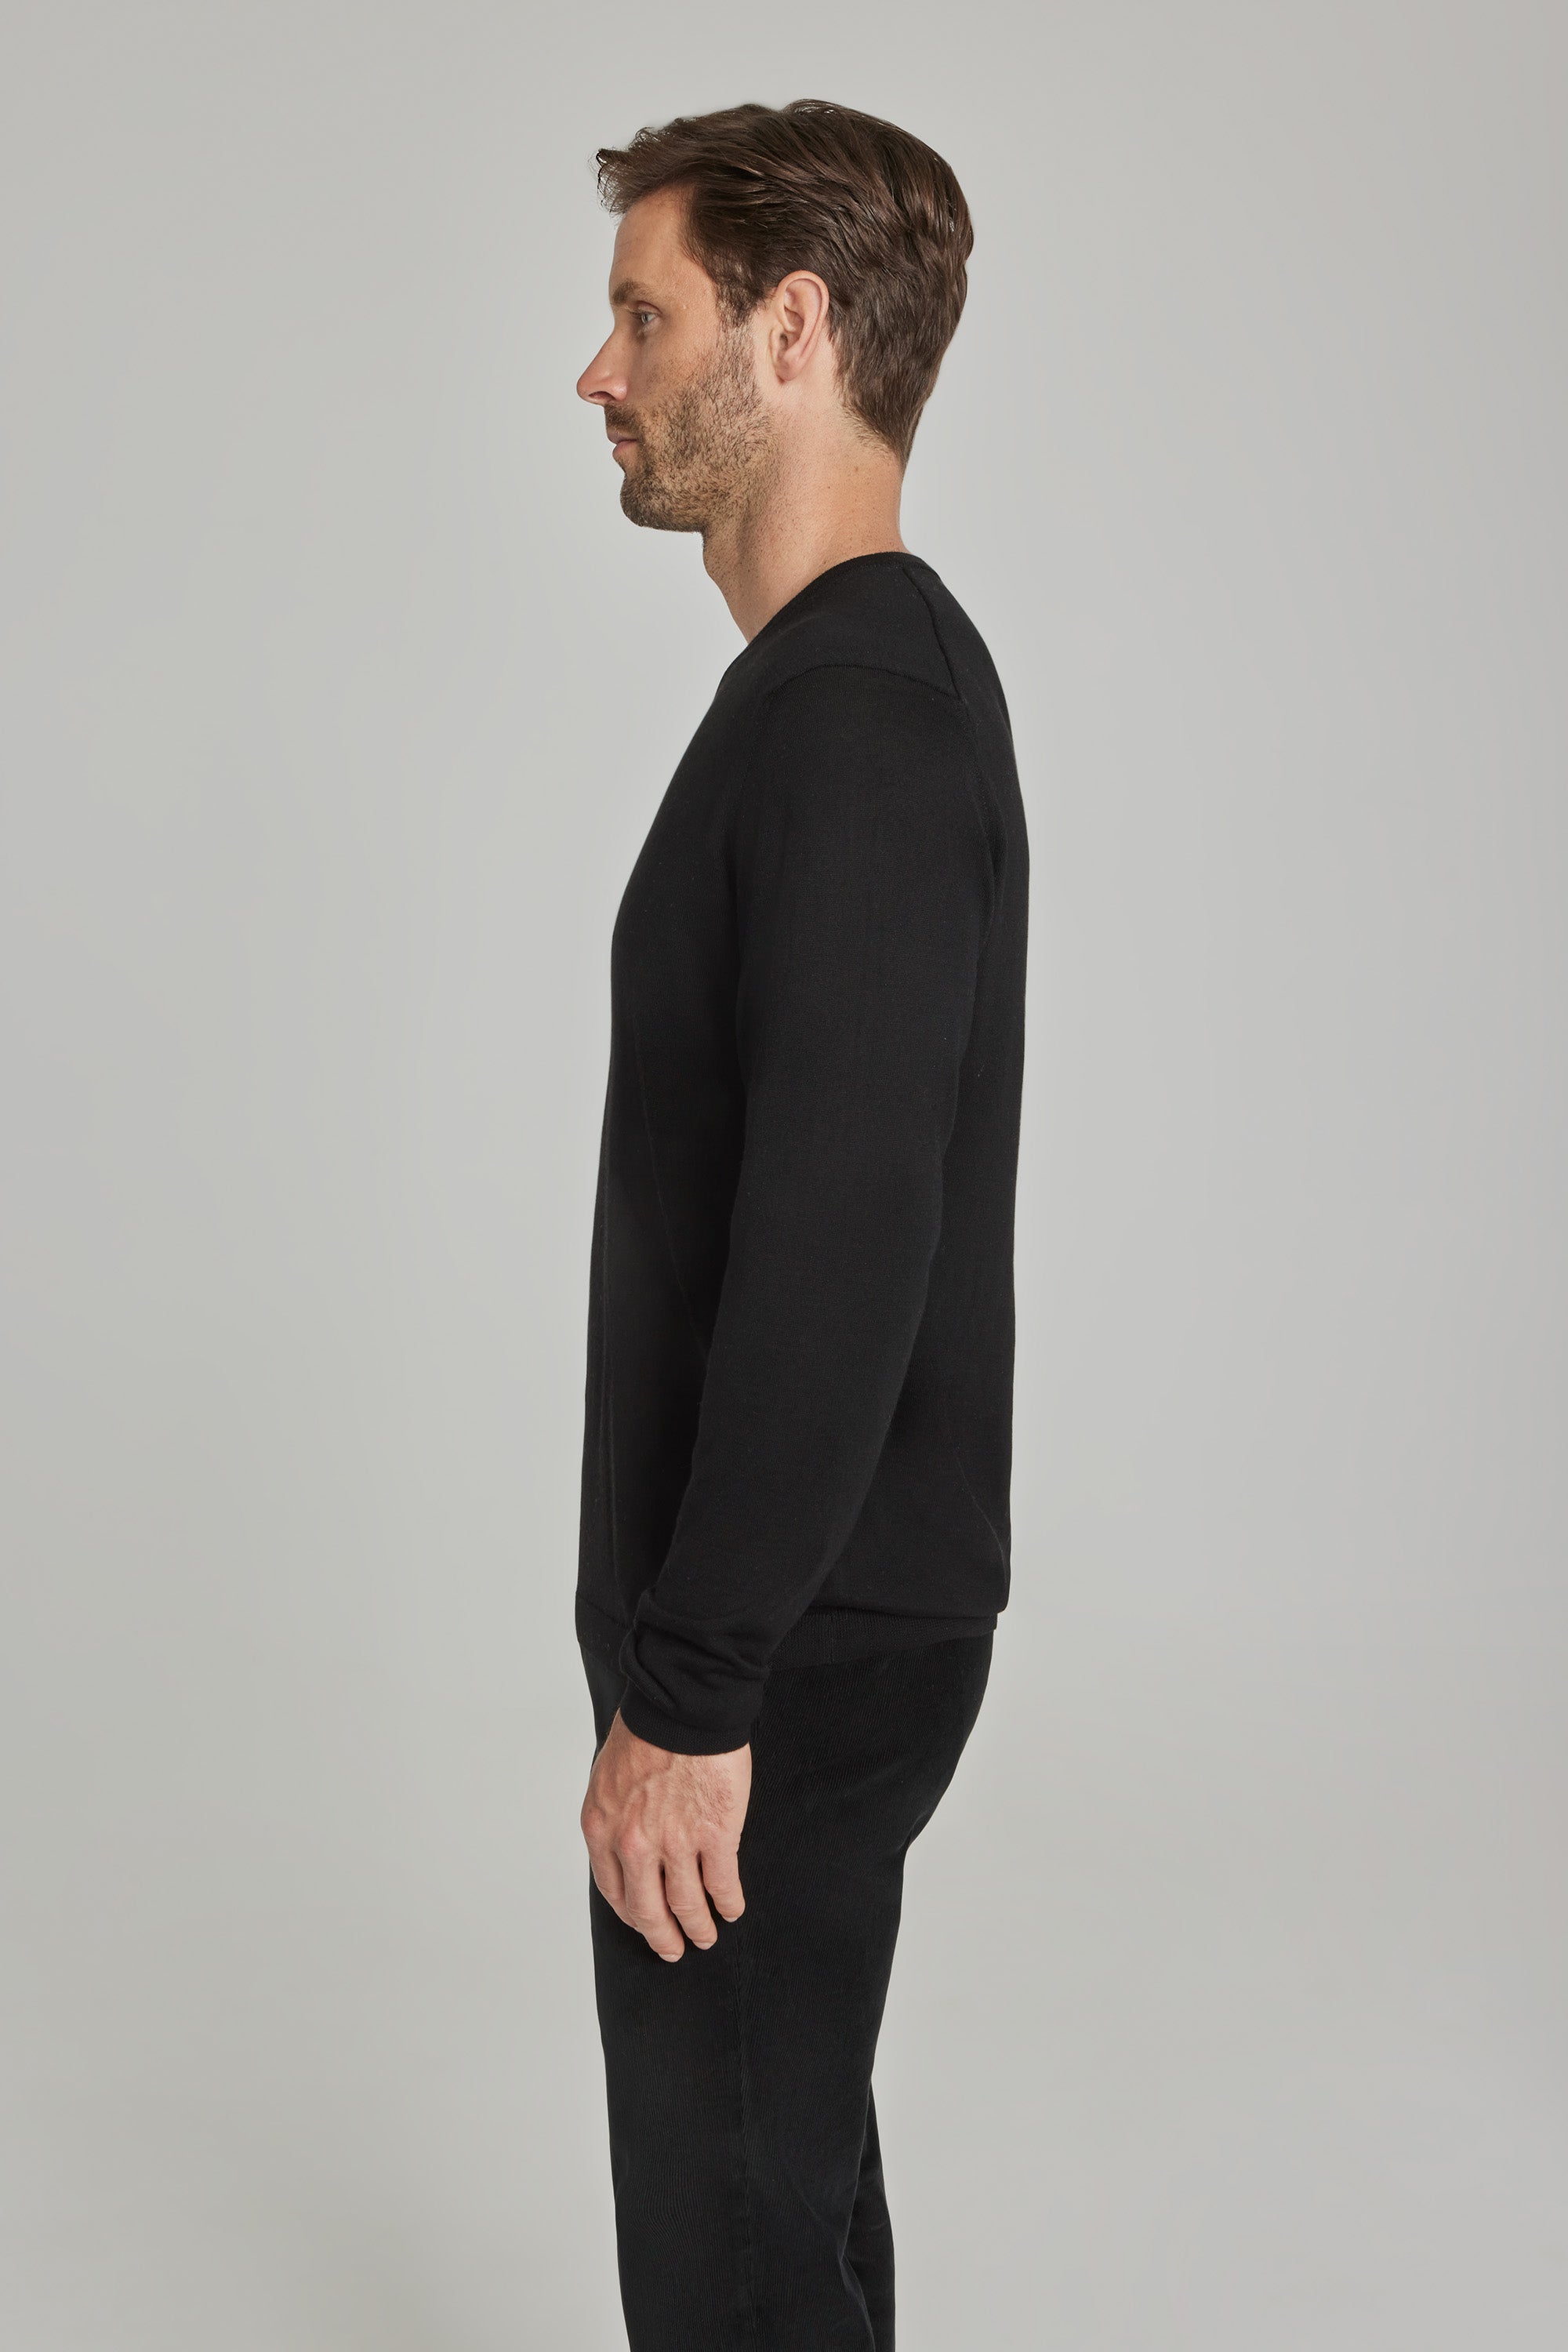 Alt view 4 Ramezay Wool, Silk and Cashmere V-Neck Sweater in Black